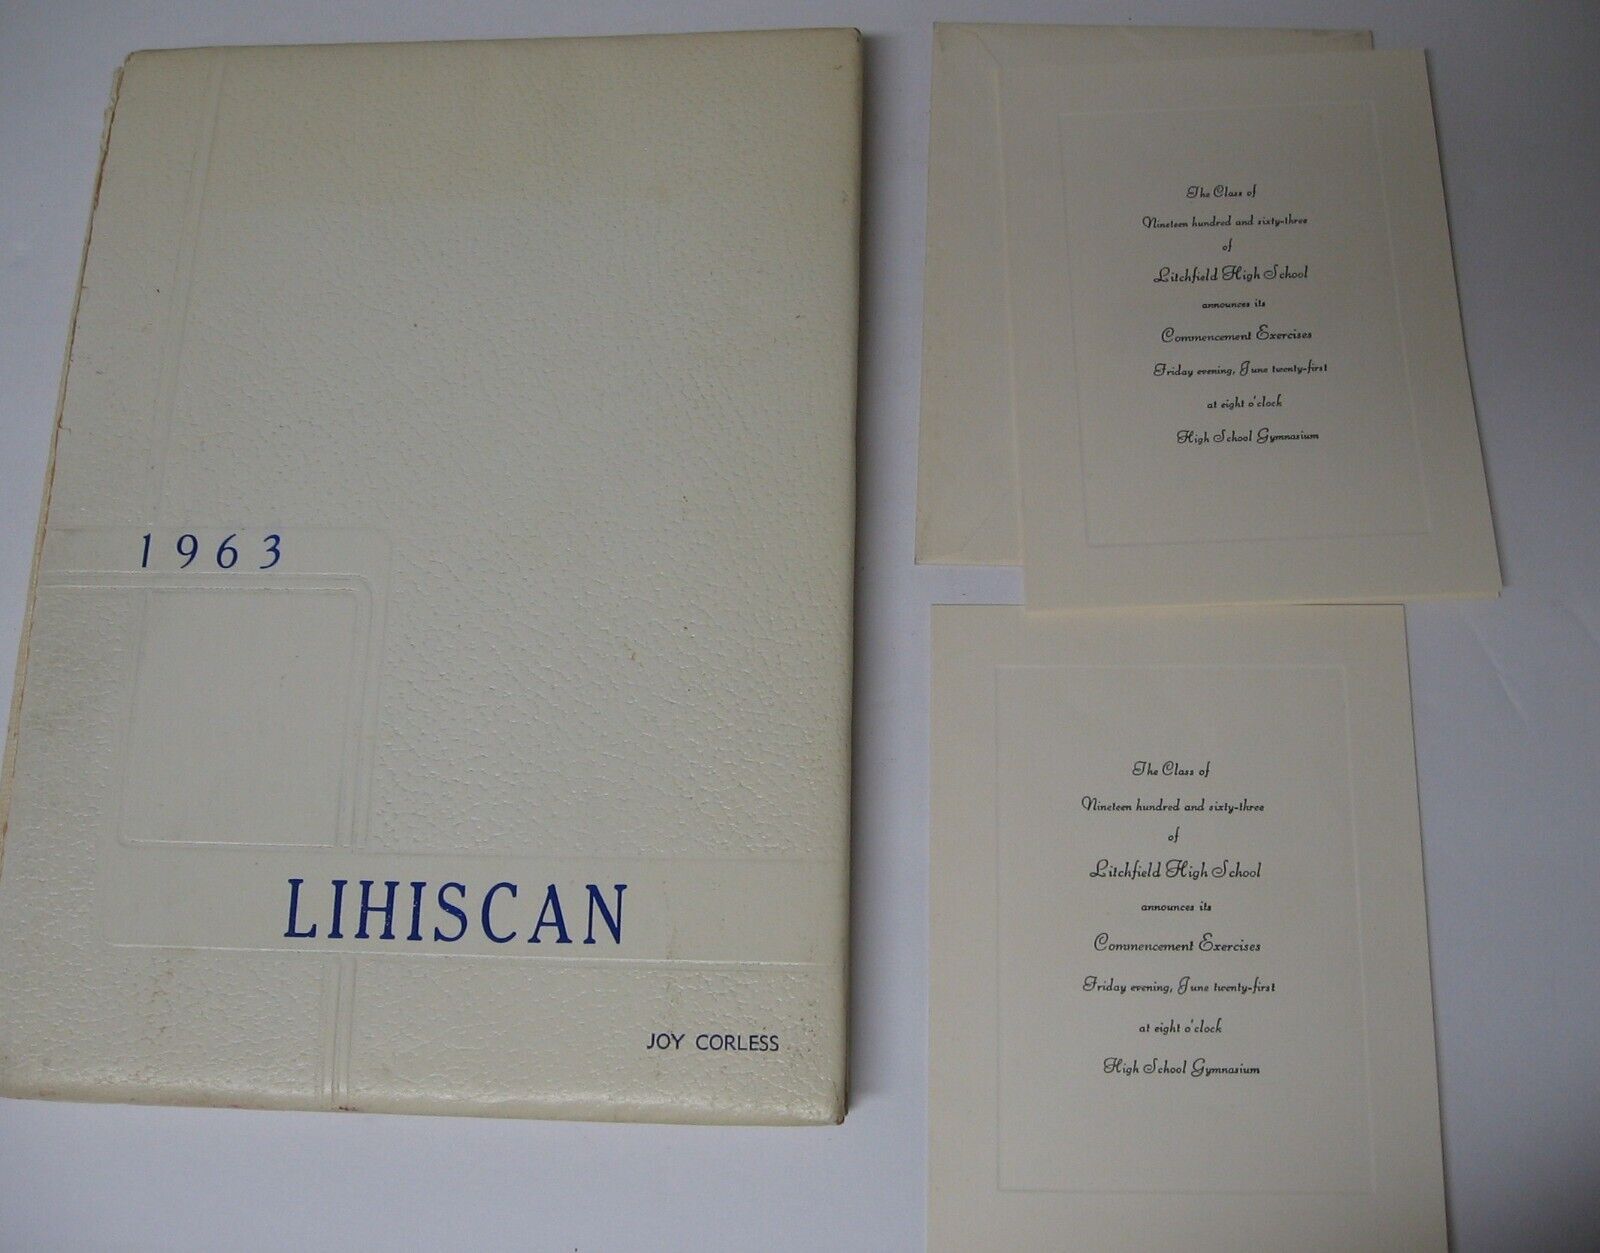 1963 Lihiscan Yearbook, Litchfield, Connecticut signed by Superintendent K. Lang